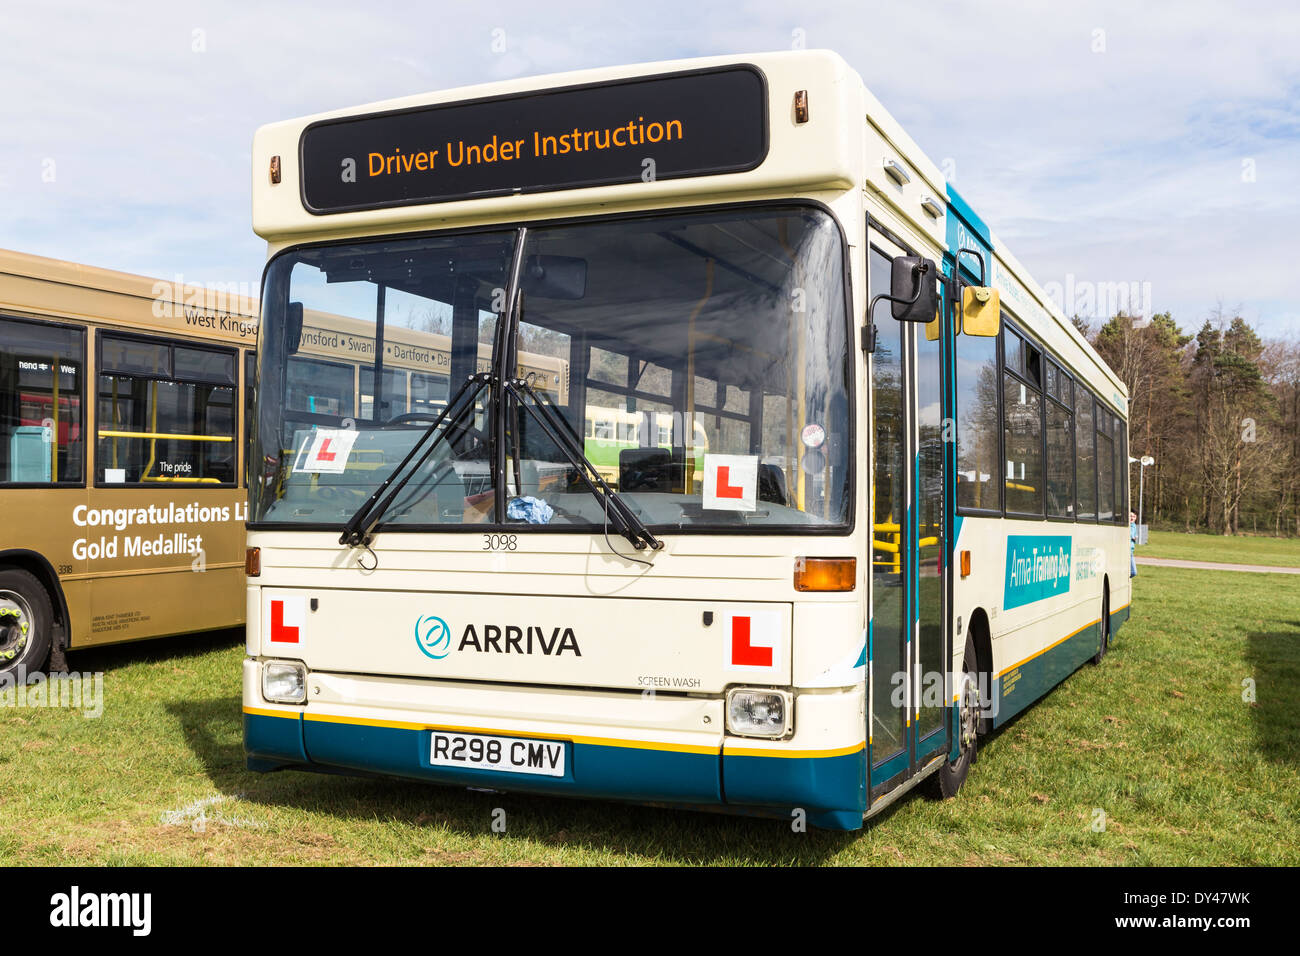 Driver Training Learner Arriva Bus Stock Photo